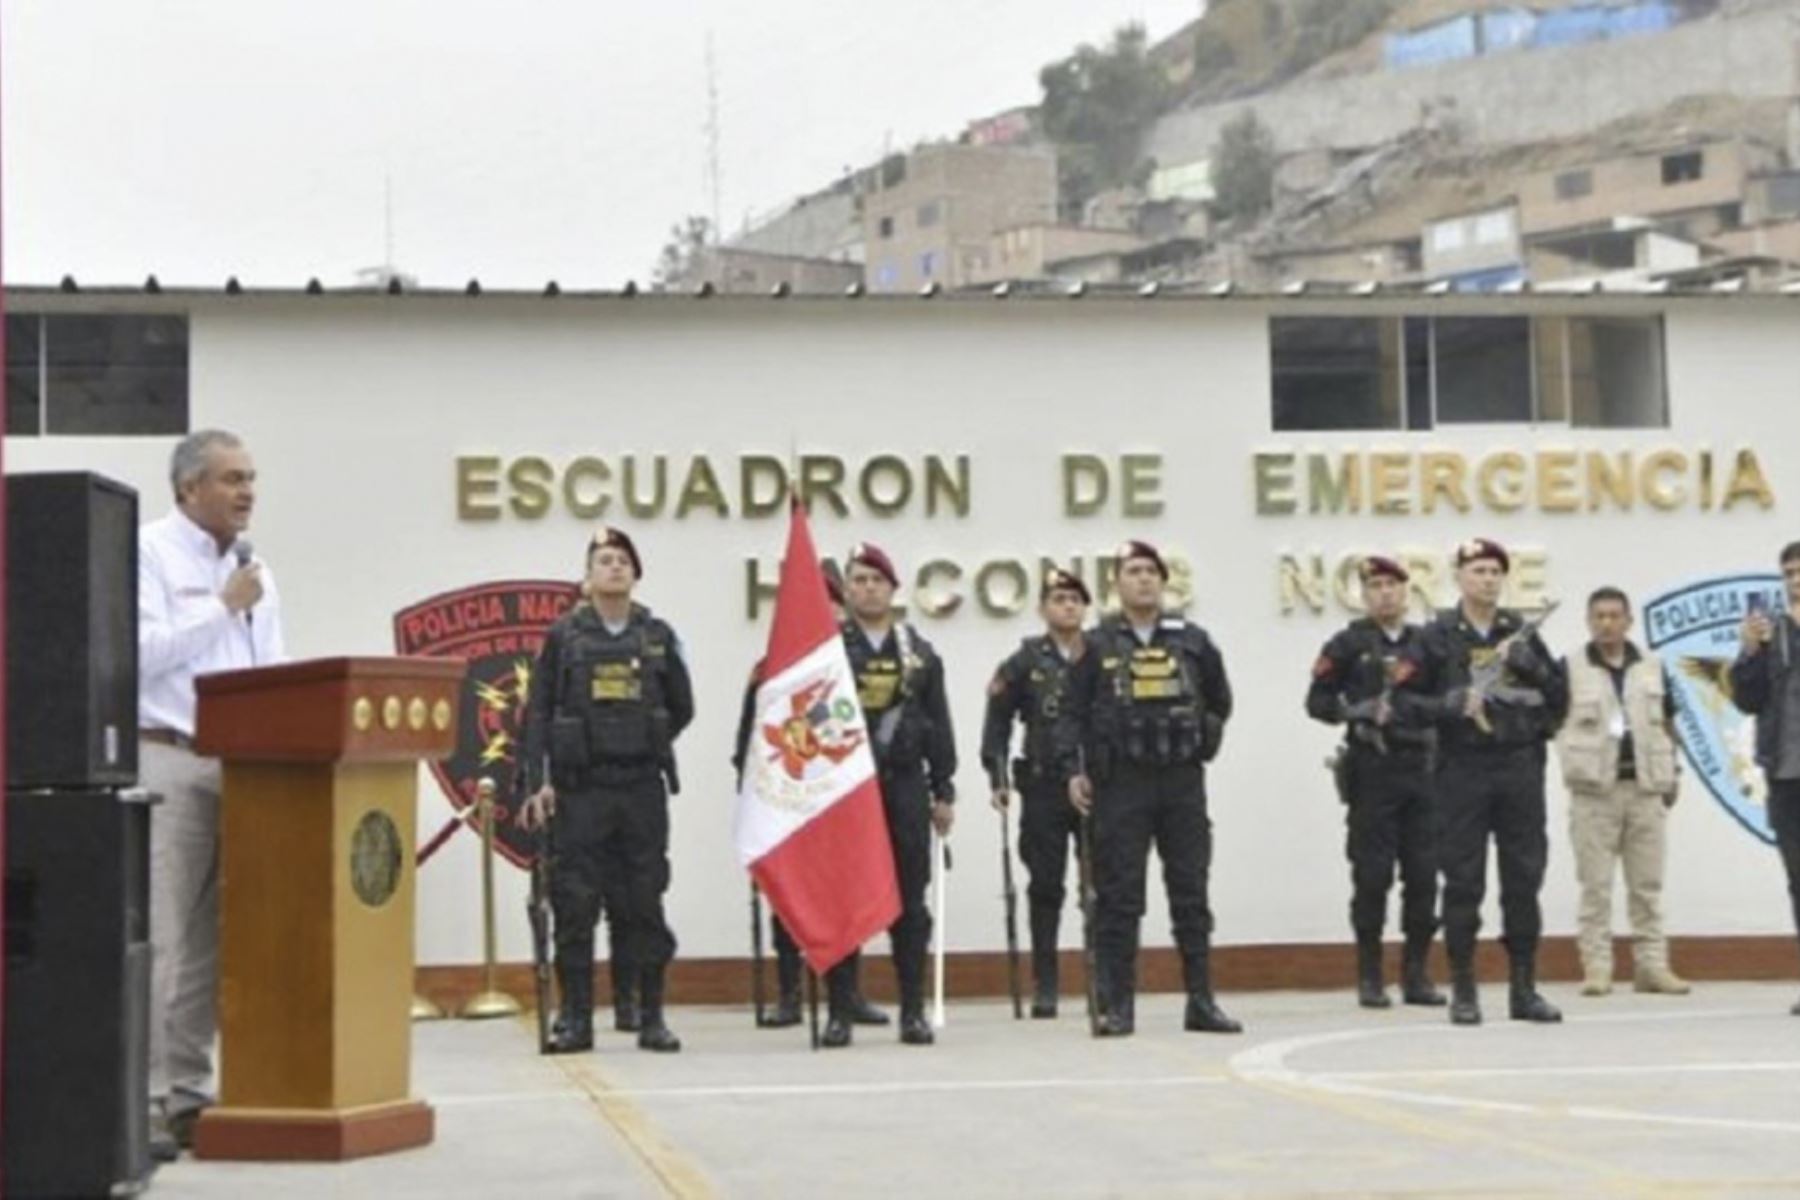 Photo: Twitter/Ministry of Interior of Peru